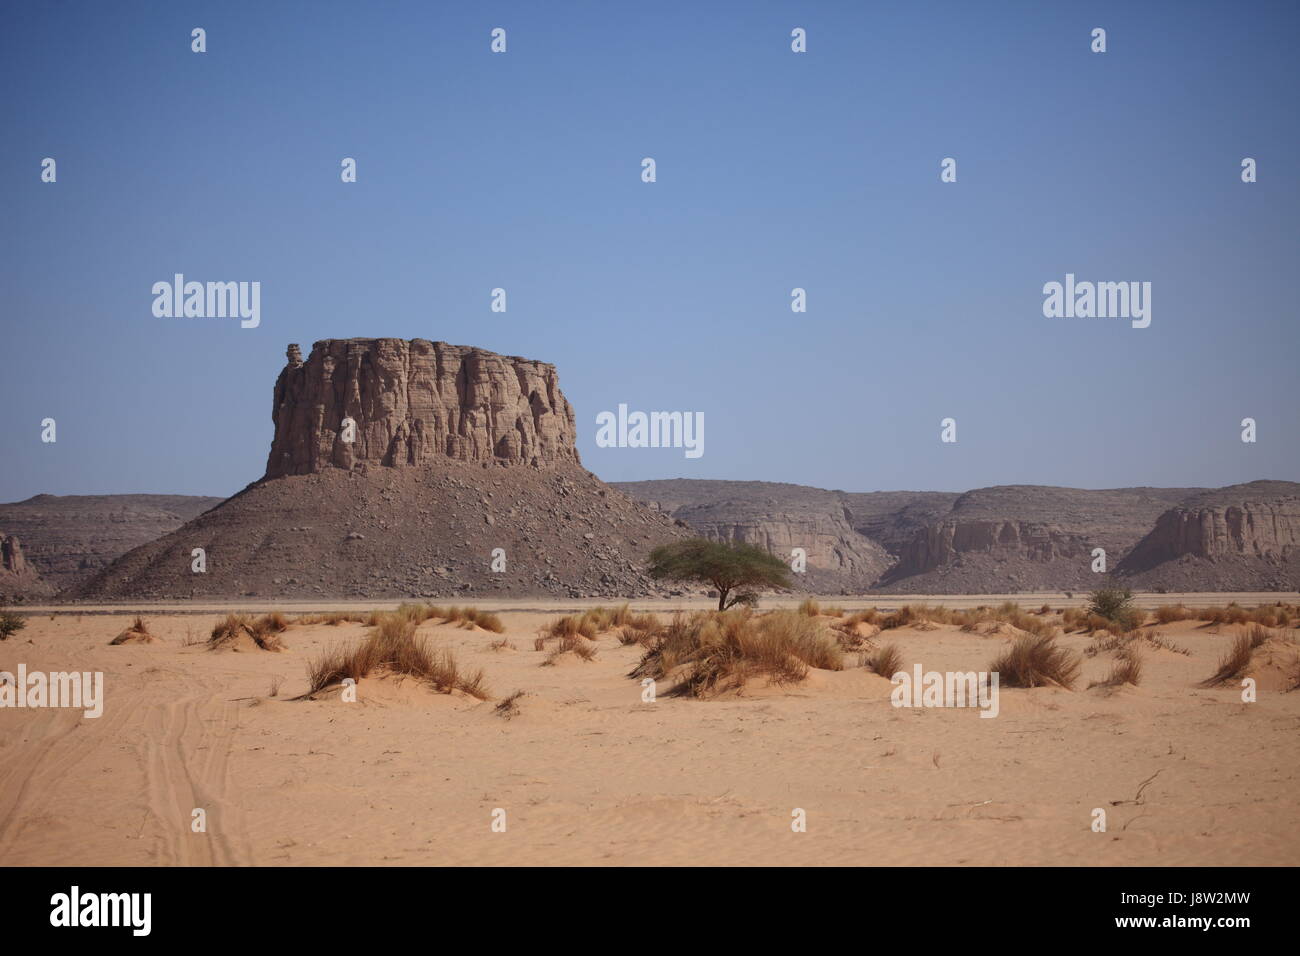 Naturphotos High Resolution Stock Photography and Images - Alamy